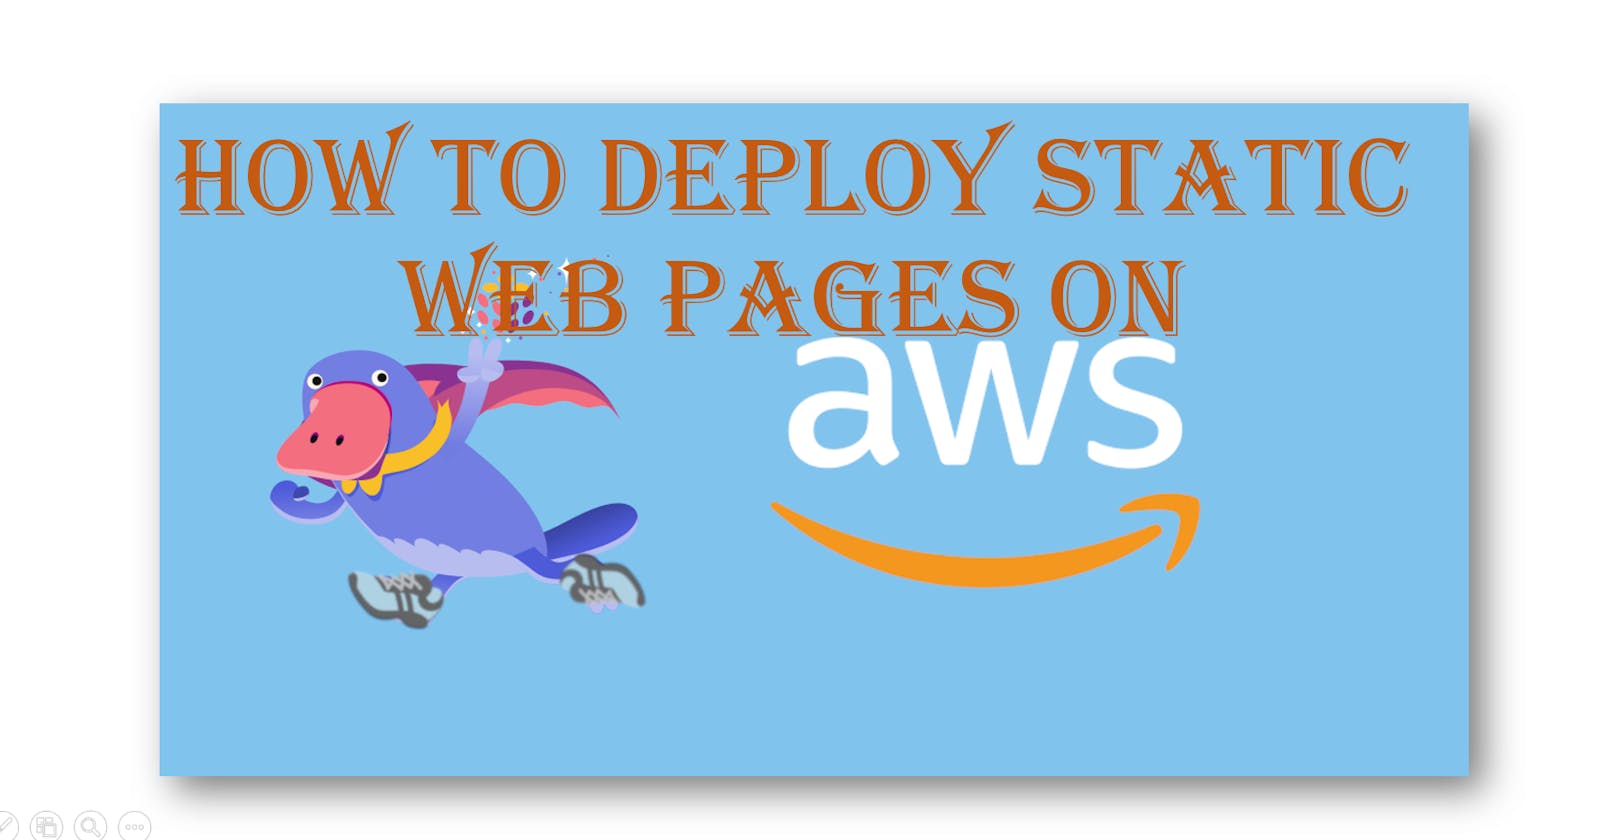 How to Deploy Static Web Pages on AWS.